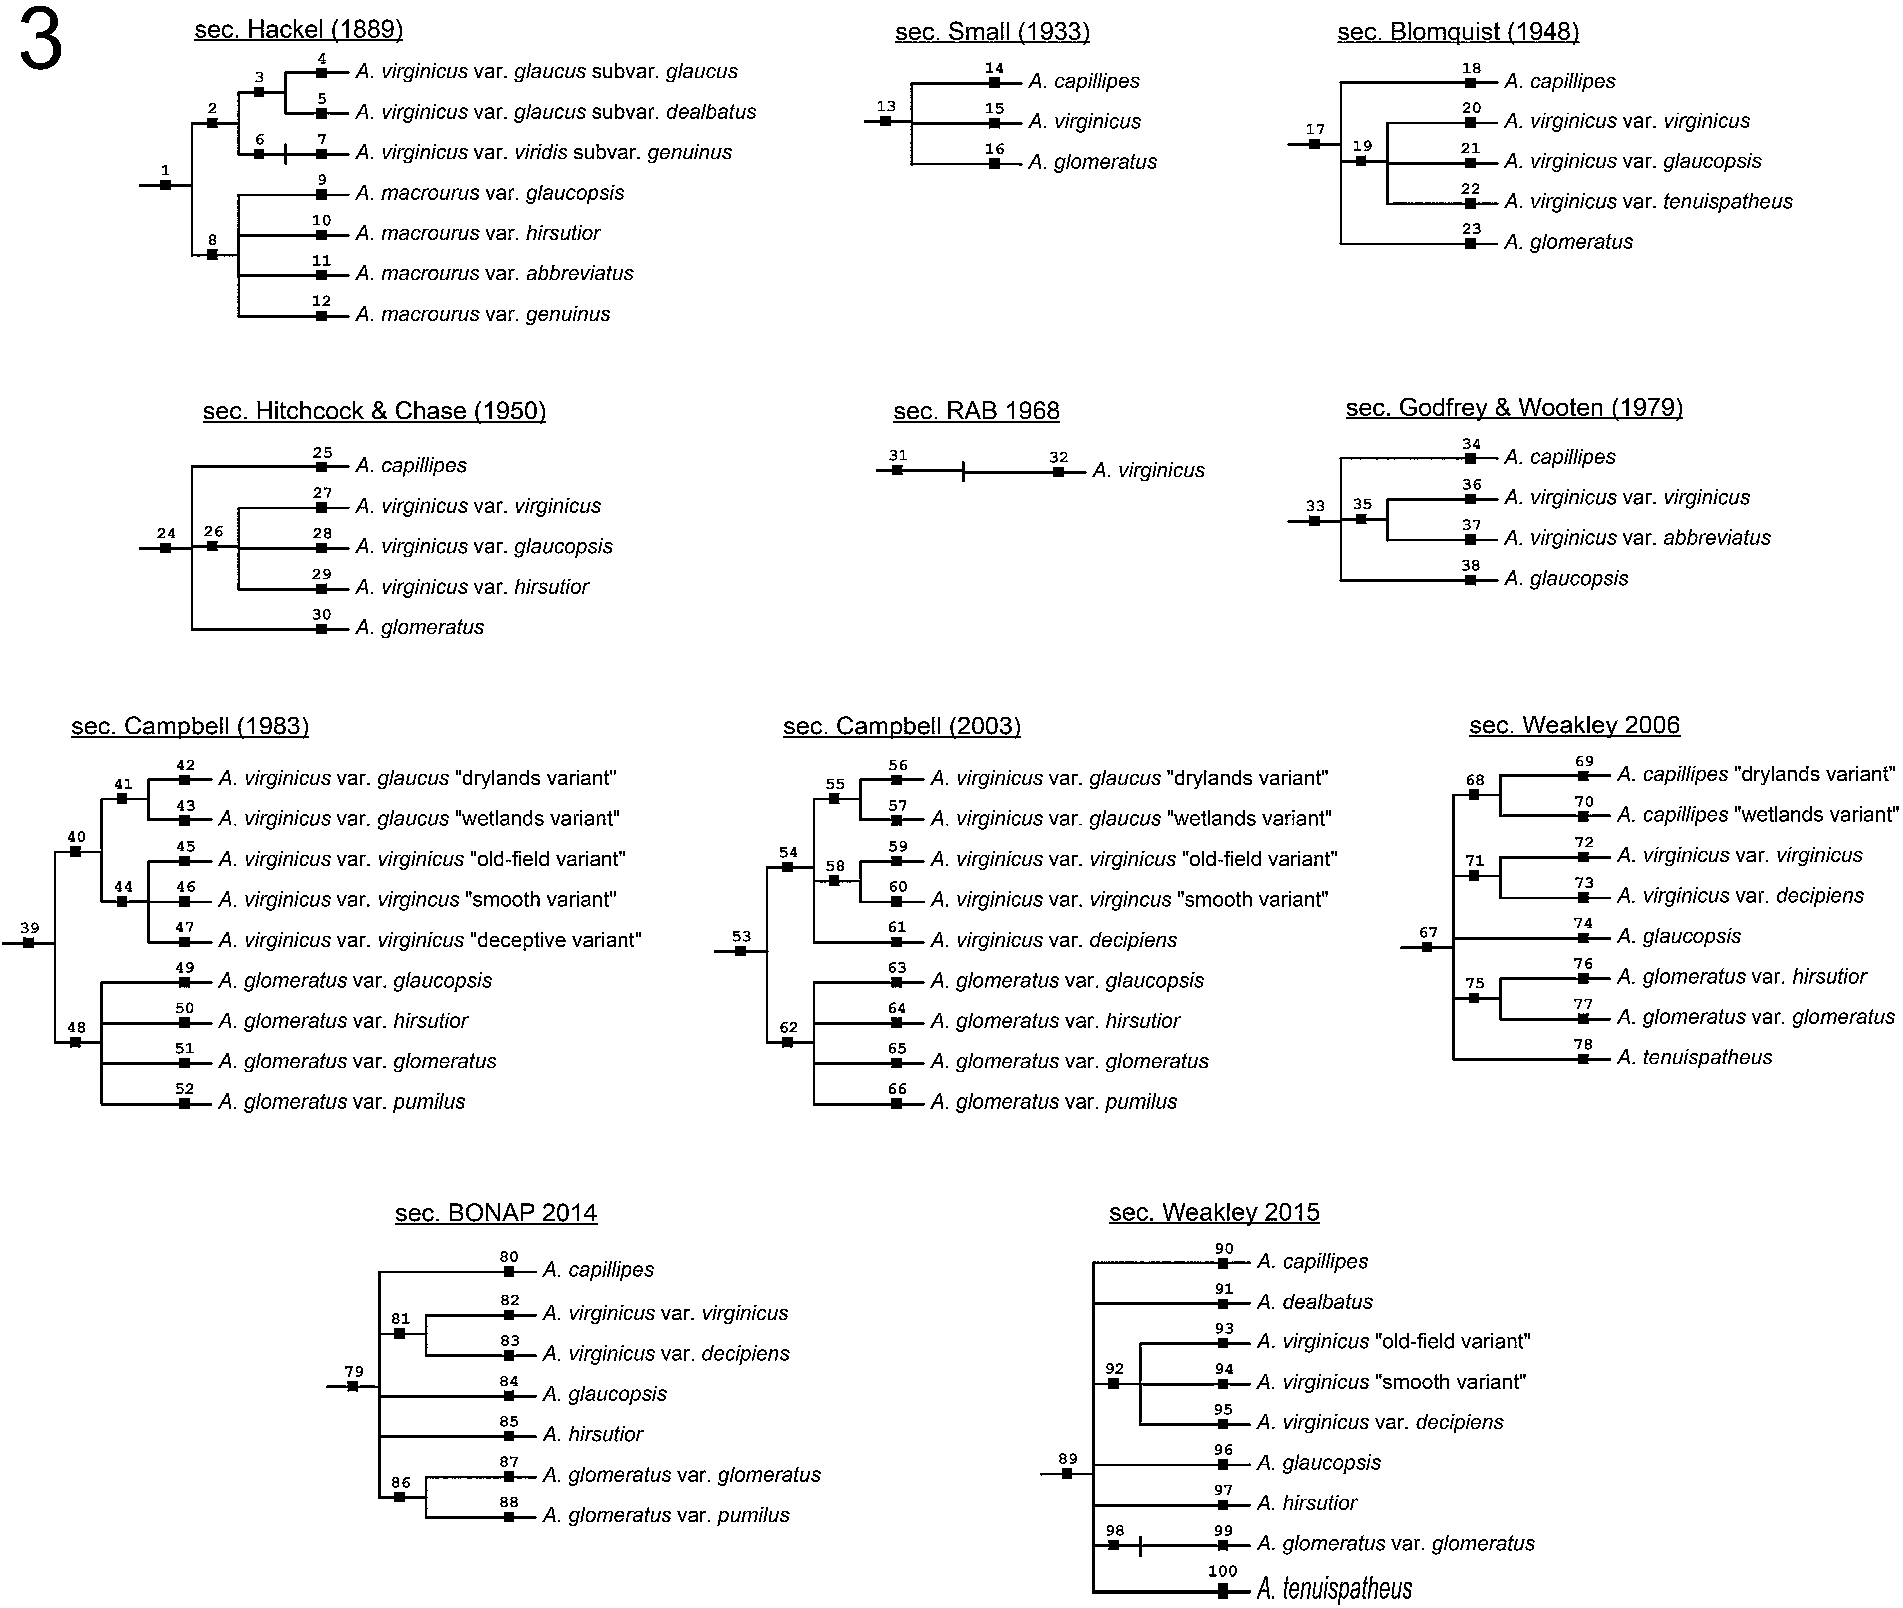 Hierarchical, multi-level representations of the 11 input classifications of the Andro-UC (see also Appendix A). Taxonomic name and concept identities (numbered from 1–100) as in Fig. 2.